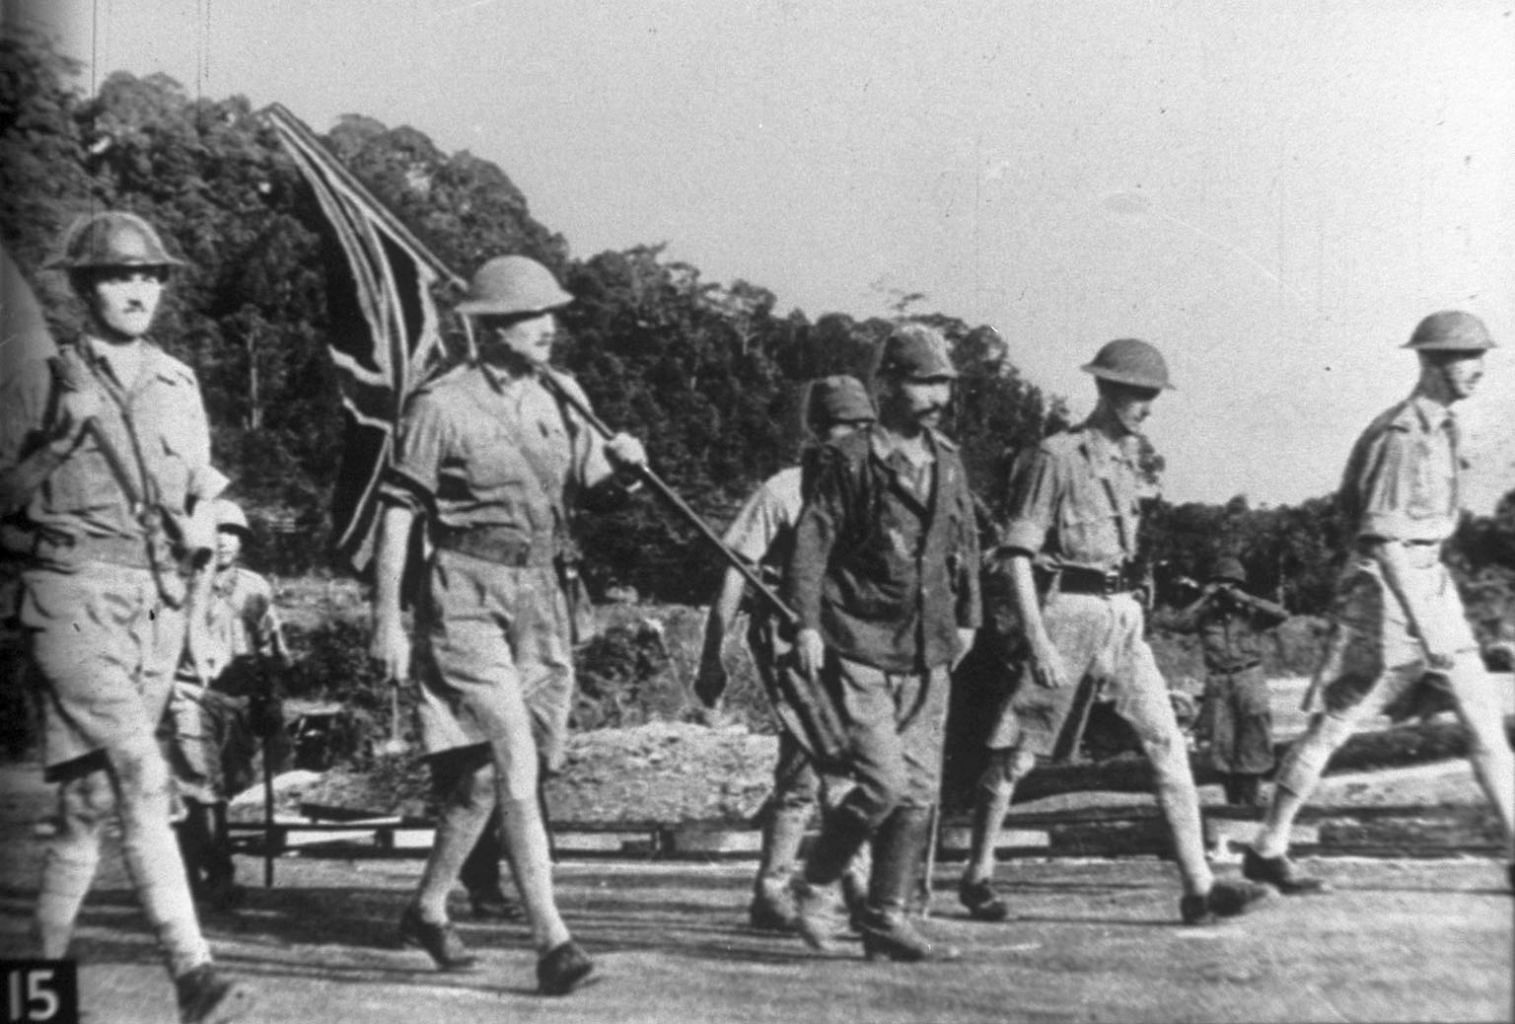 Lieutenant-General Arthur Ernest Percival (right) and other British officers on the way to Ford Factory in Bukit Timah on Feb 15, 1942, to surrender, marking the start of the Japanese Occupation.